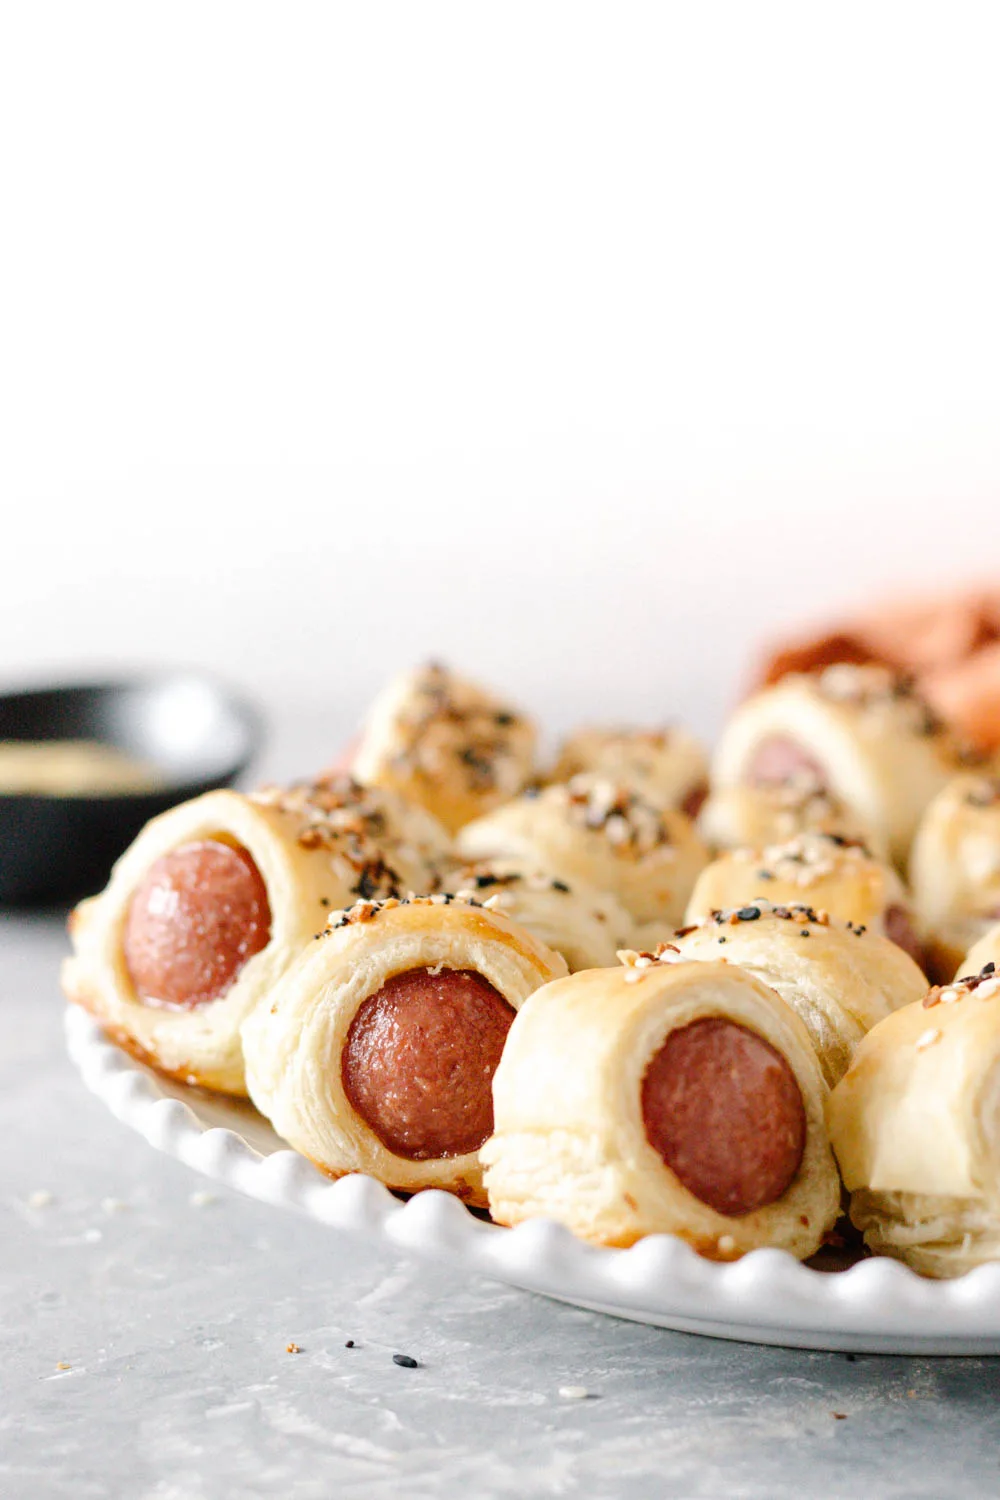 Hot Link Pigs in a Blanket - Evergood Foods